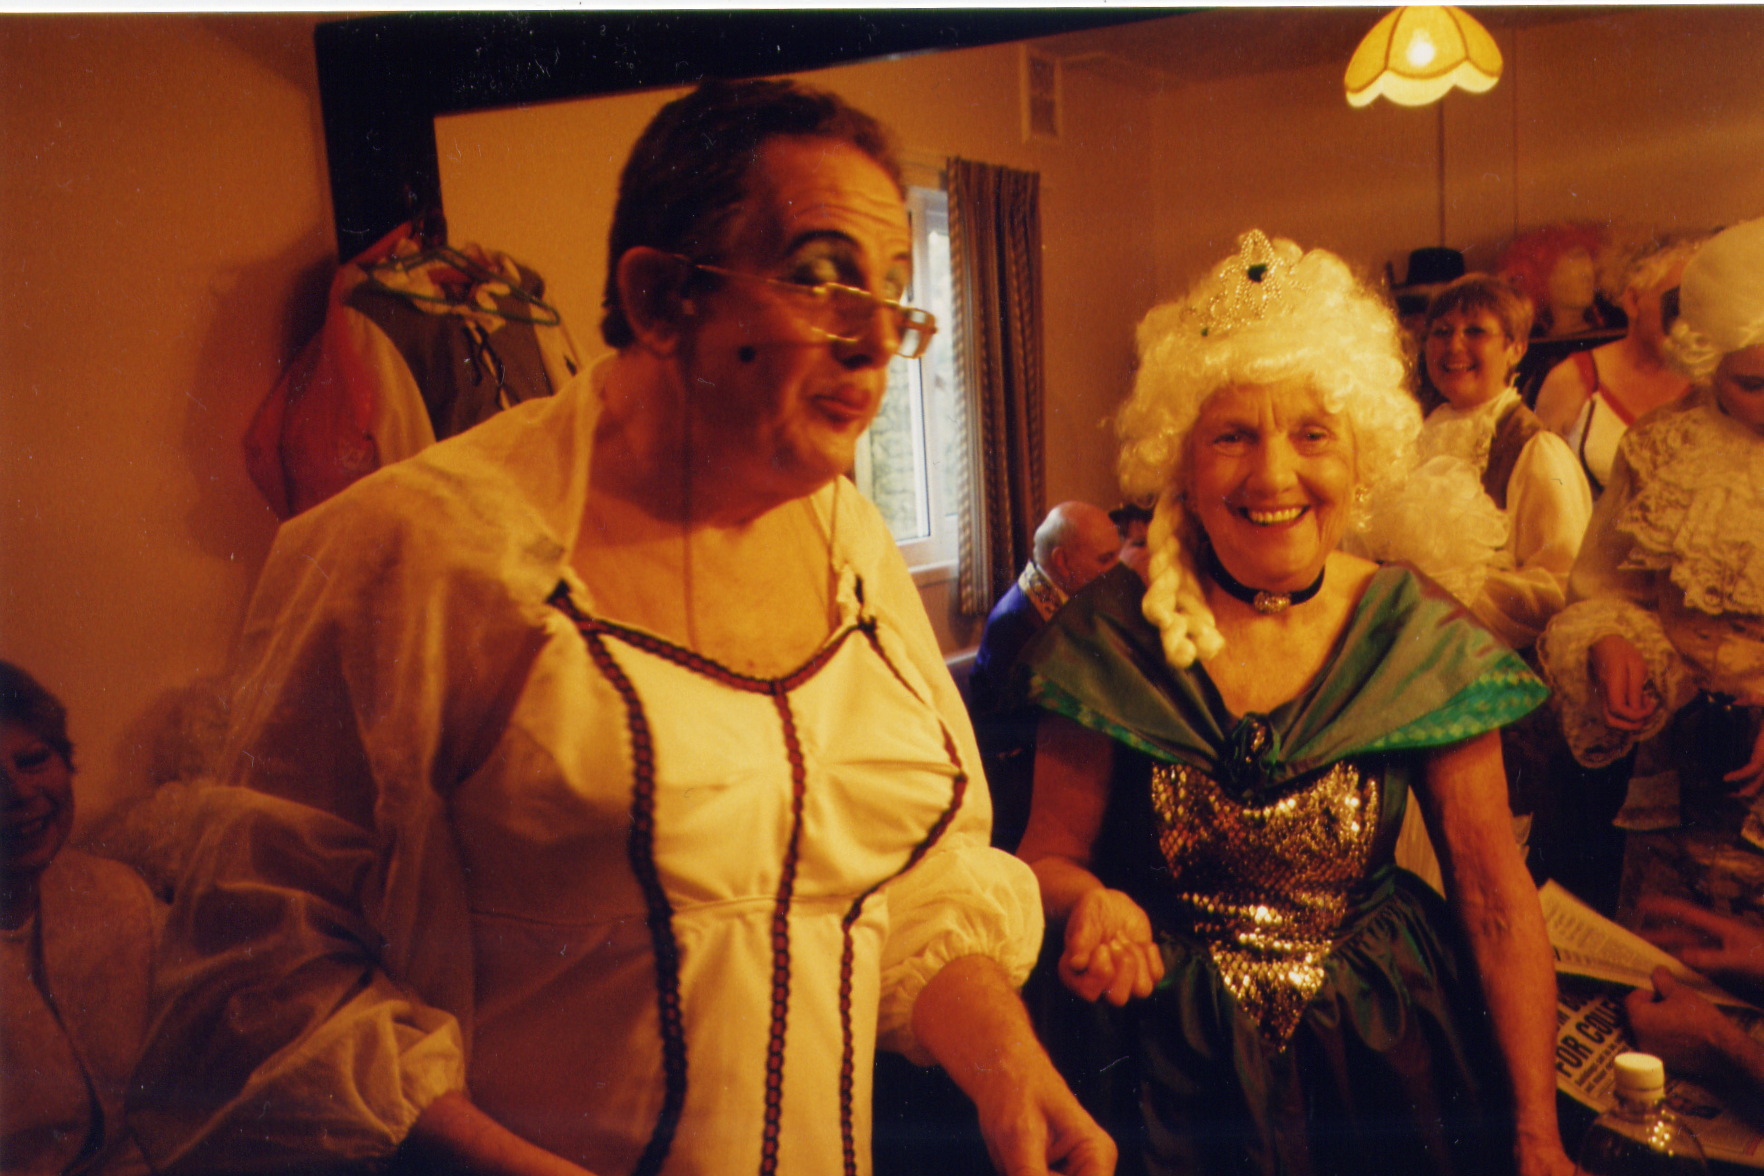 Mike Read dressing for ‘Dame’ and Mary Bailey – “Cinderella” 2000